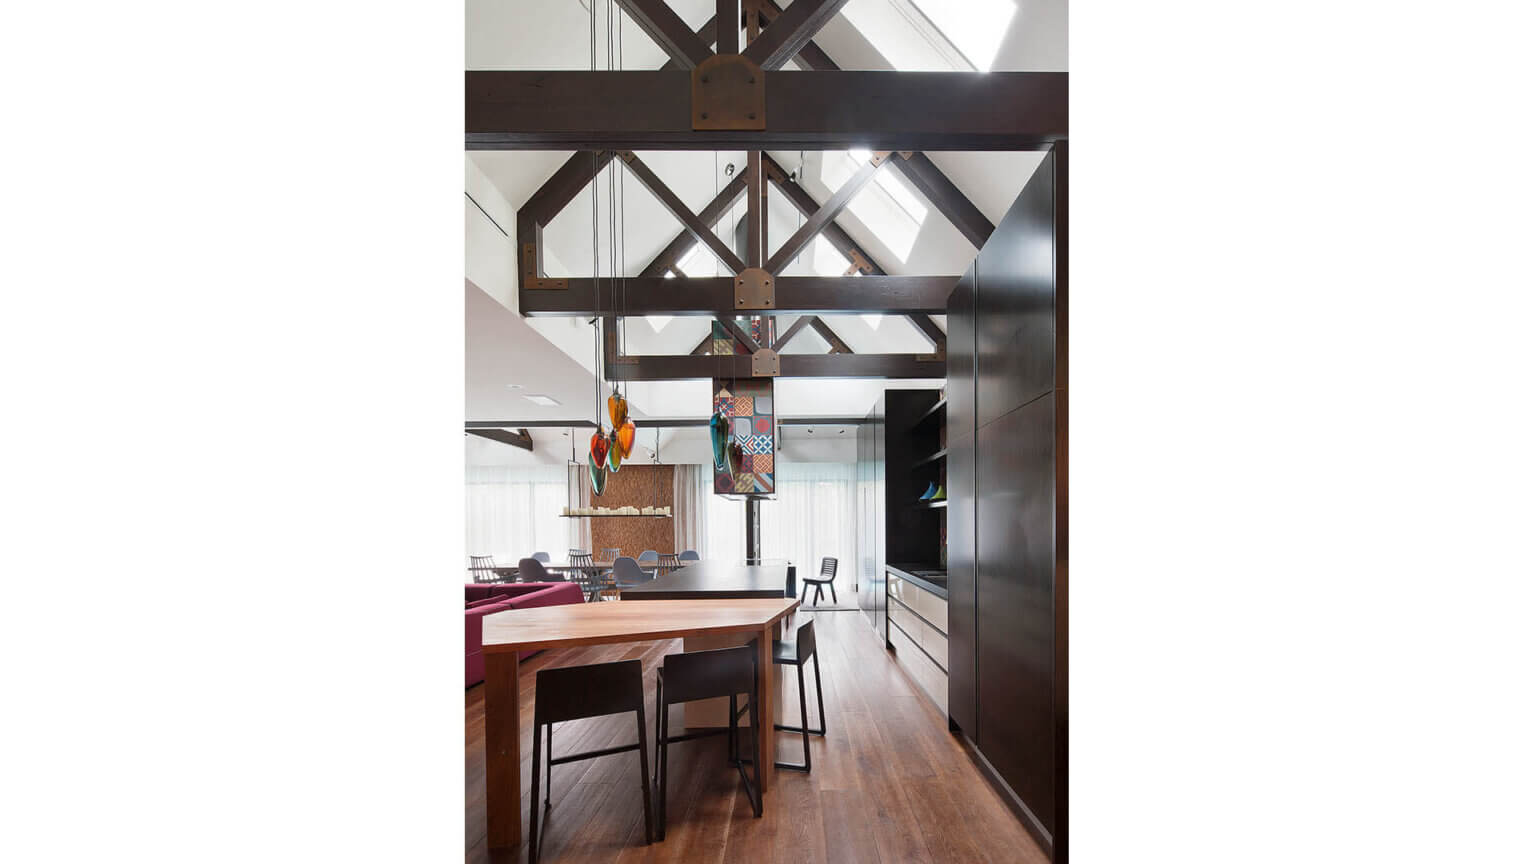 Malvern extensions and renovation - kitchen with high rafters